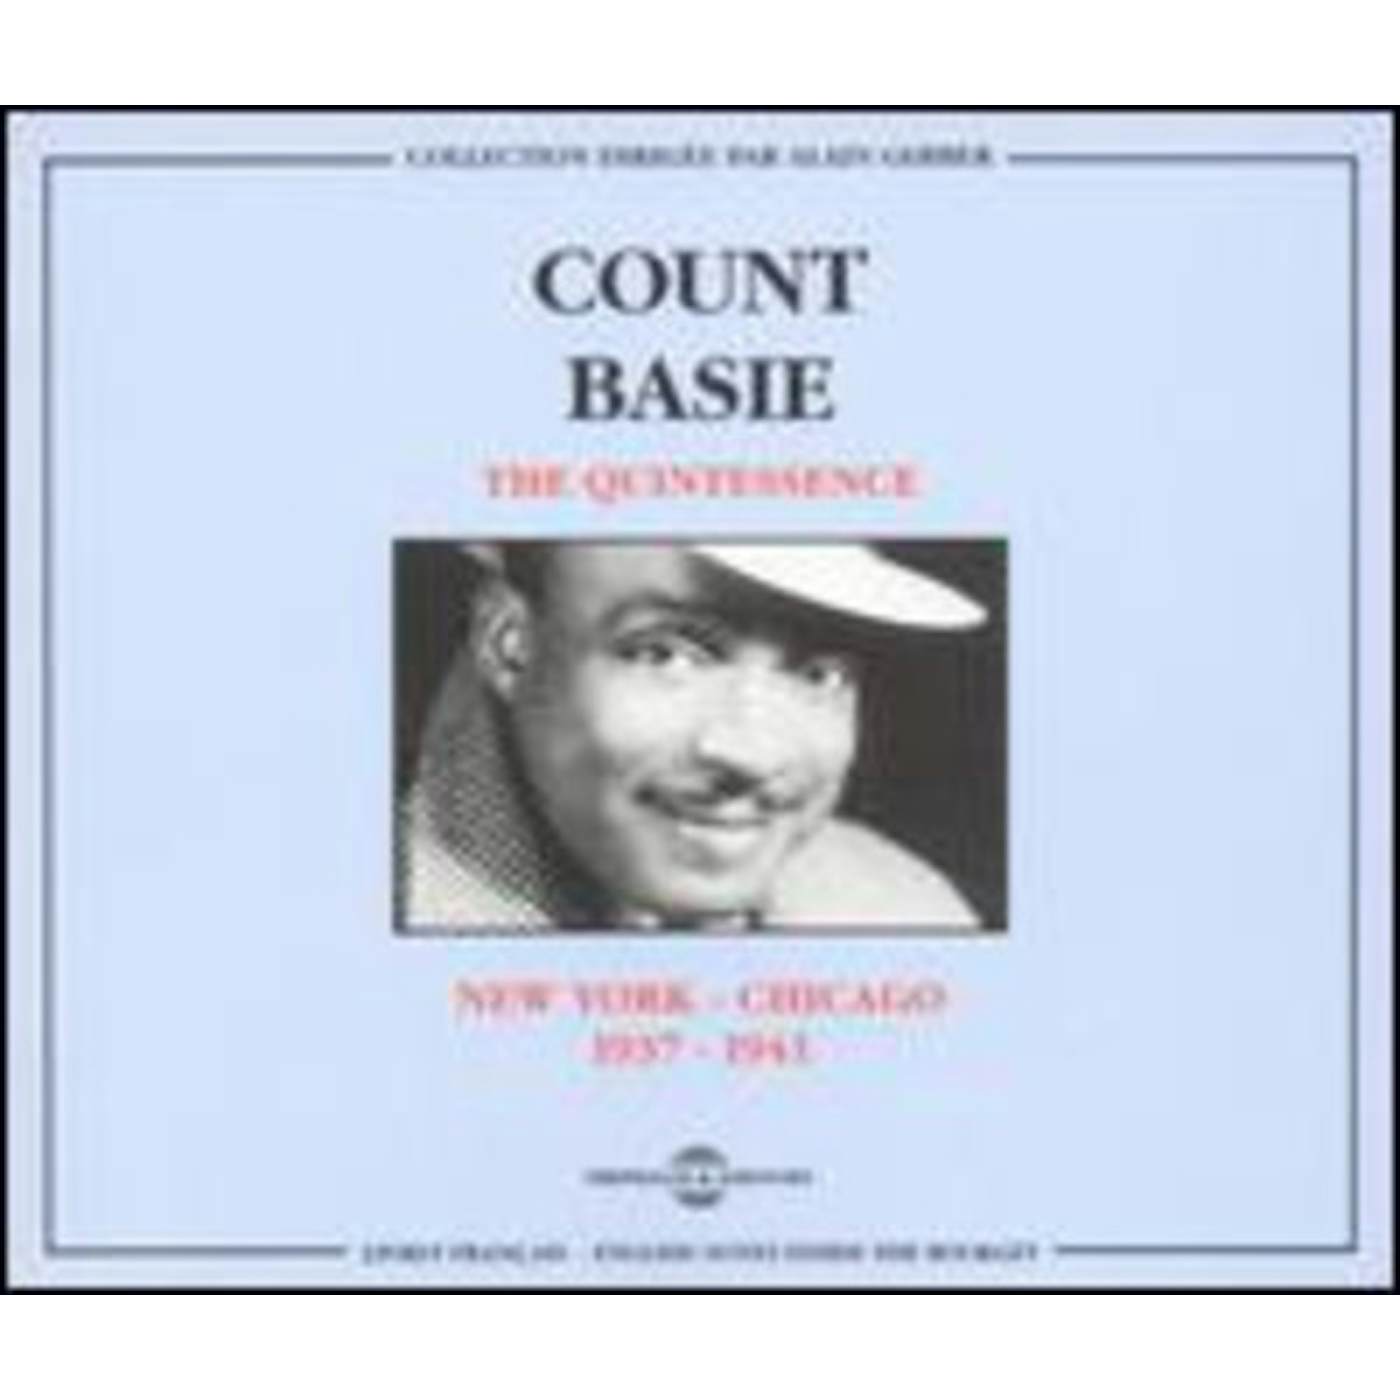 Count Basie NEW YORK TO CHICAGO 1937-1941 CD